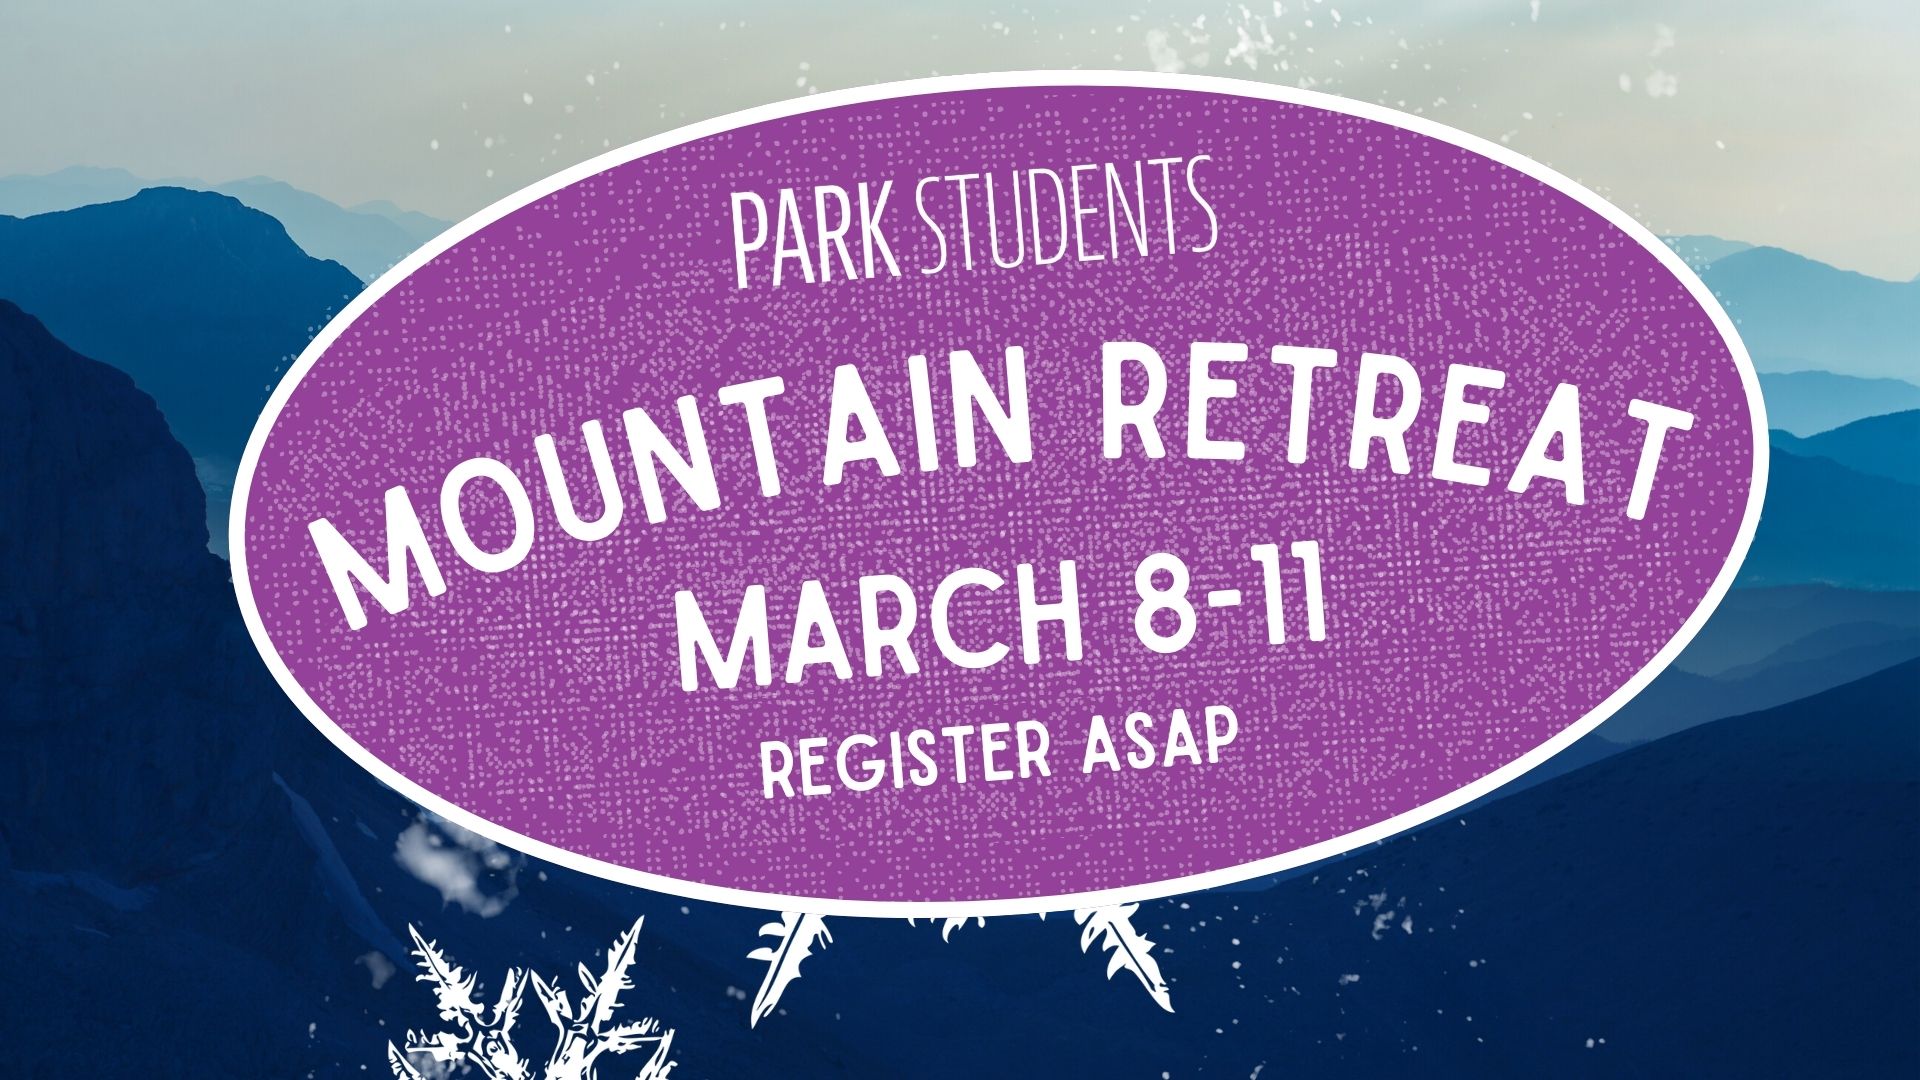 Park Students Mountain Retreat March 8-11